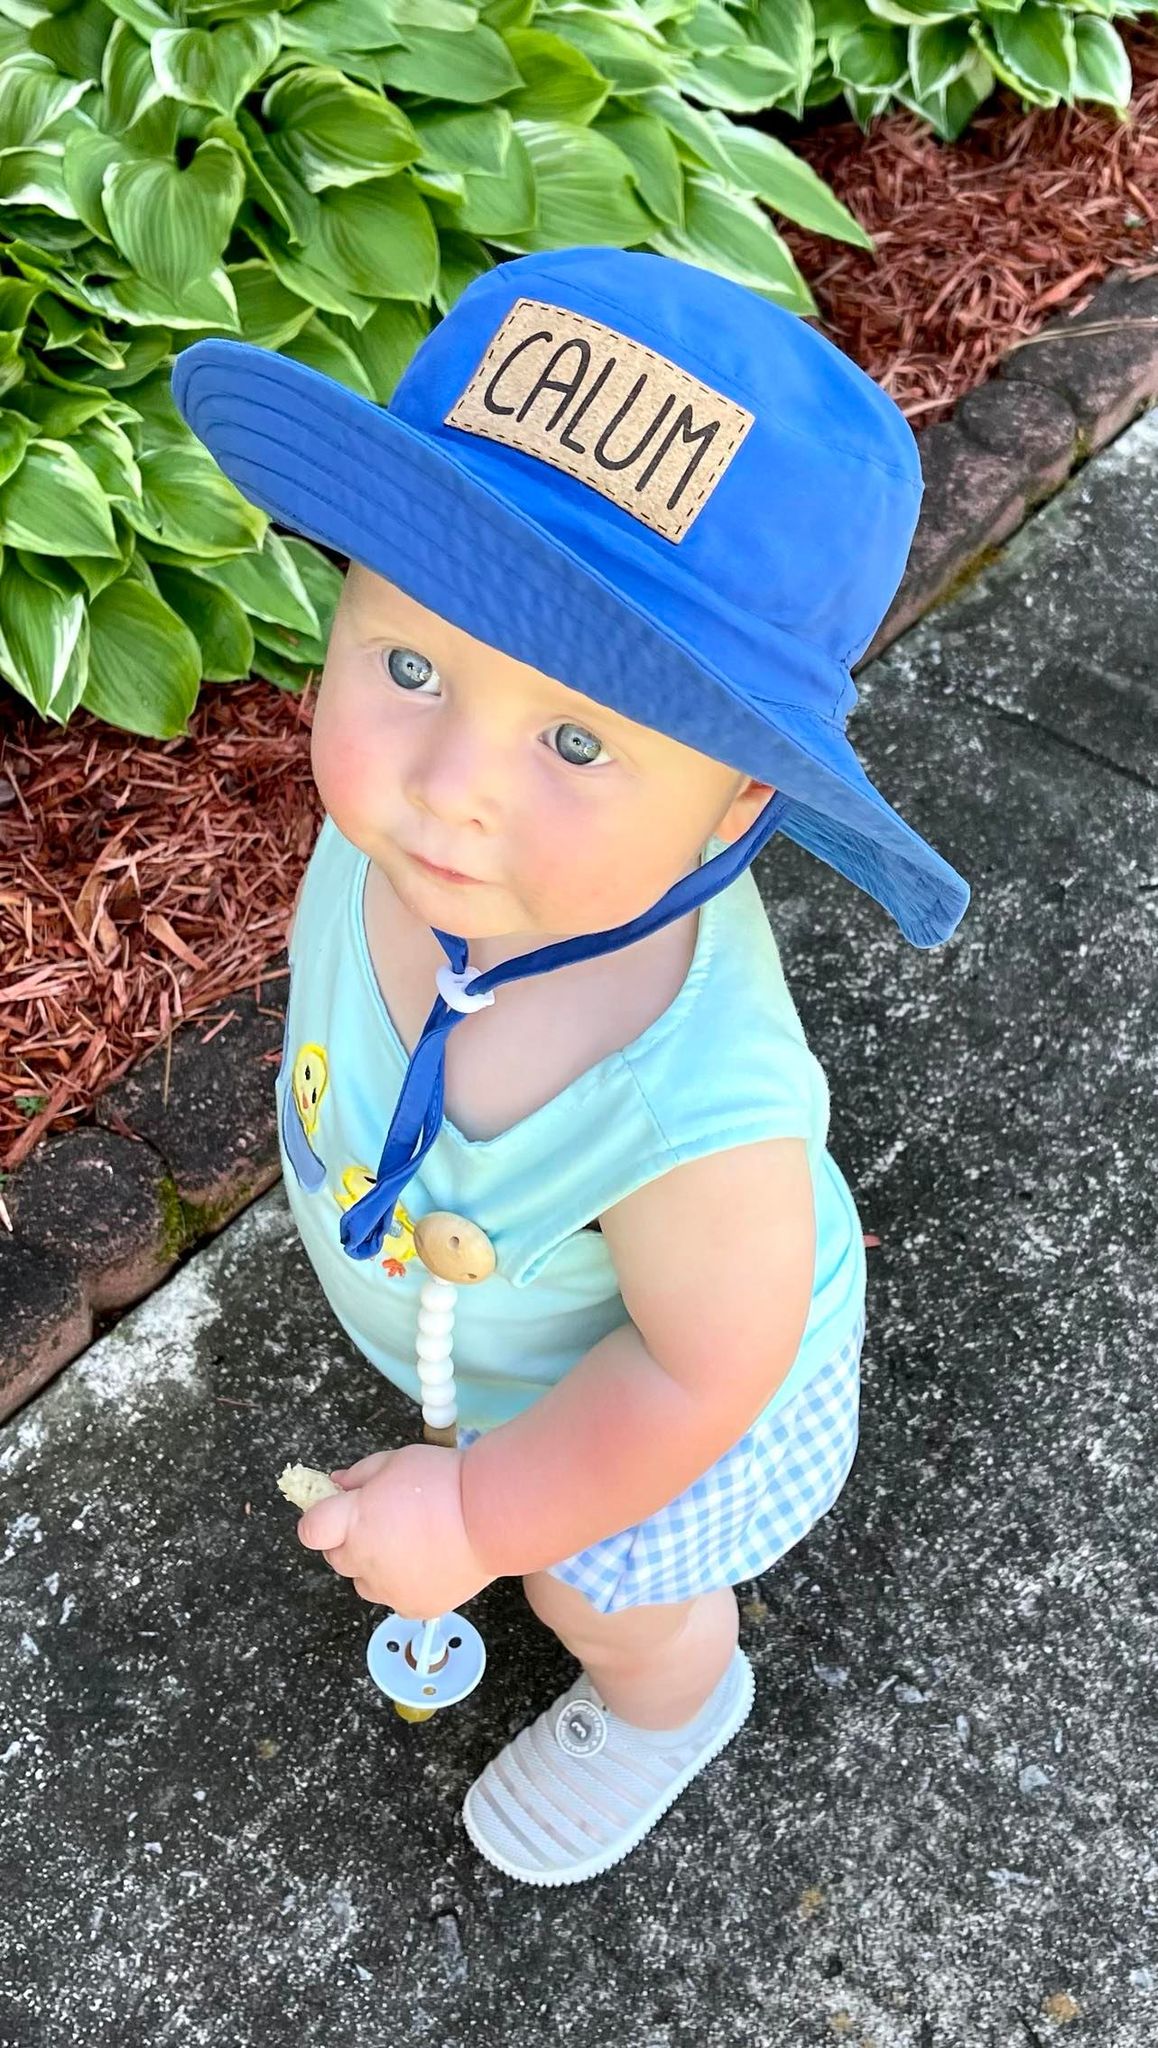 Baby, Toddler, Kids Size Adjustable Bucket Hats, Boys and Girls